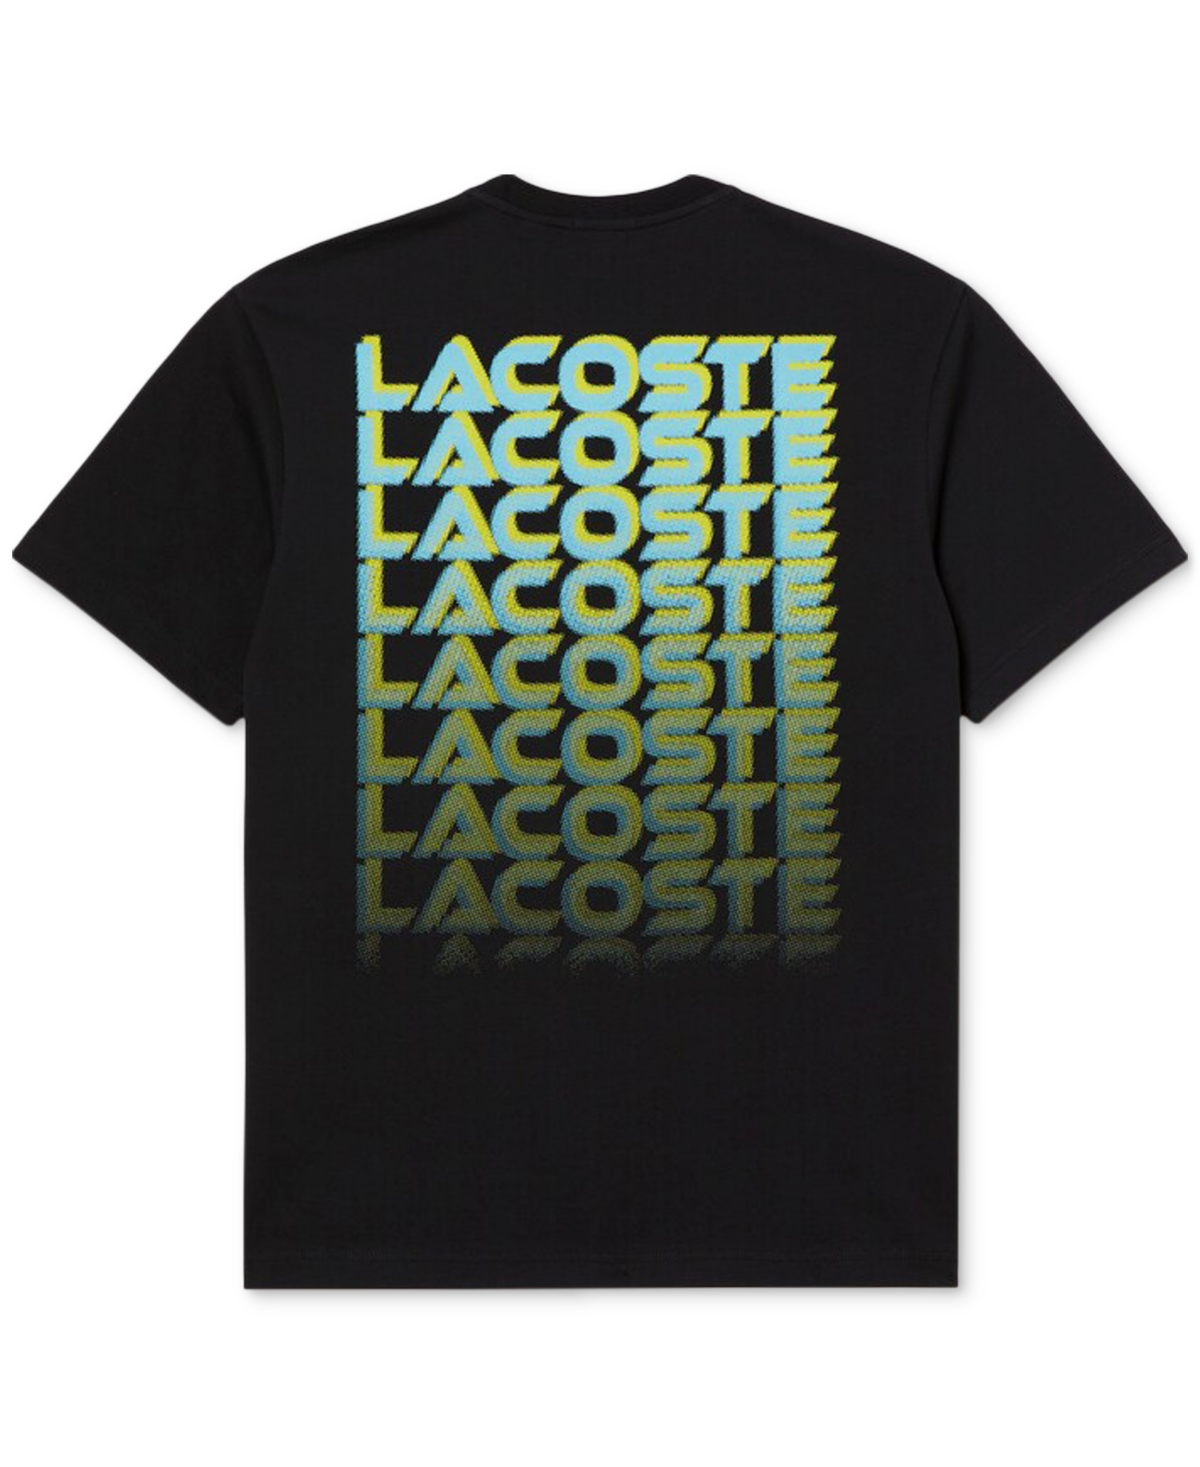 LACOSTE MEN'S RELAXED-FIT GLOBAL LOGO GRAPHIC T-SHIRT